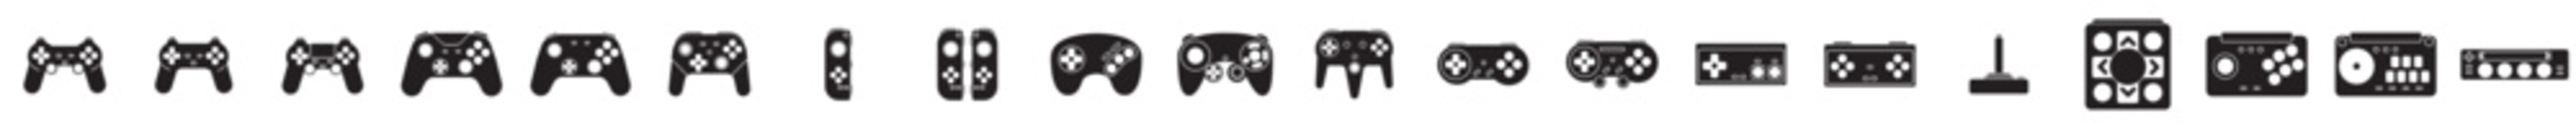 Game Controllers Glyph Set